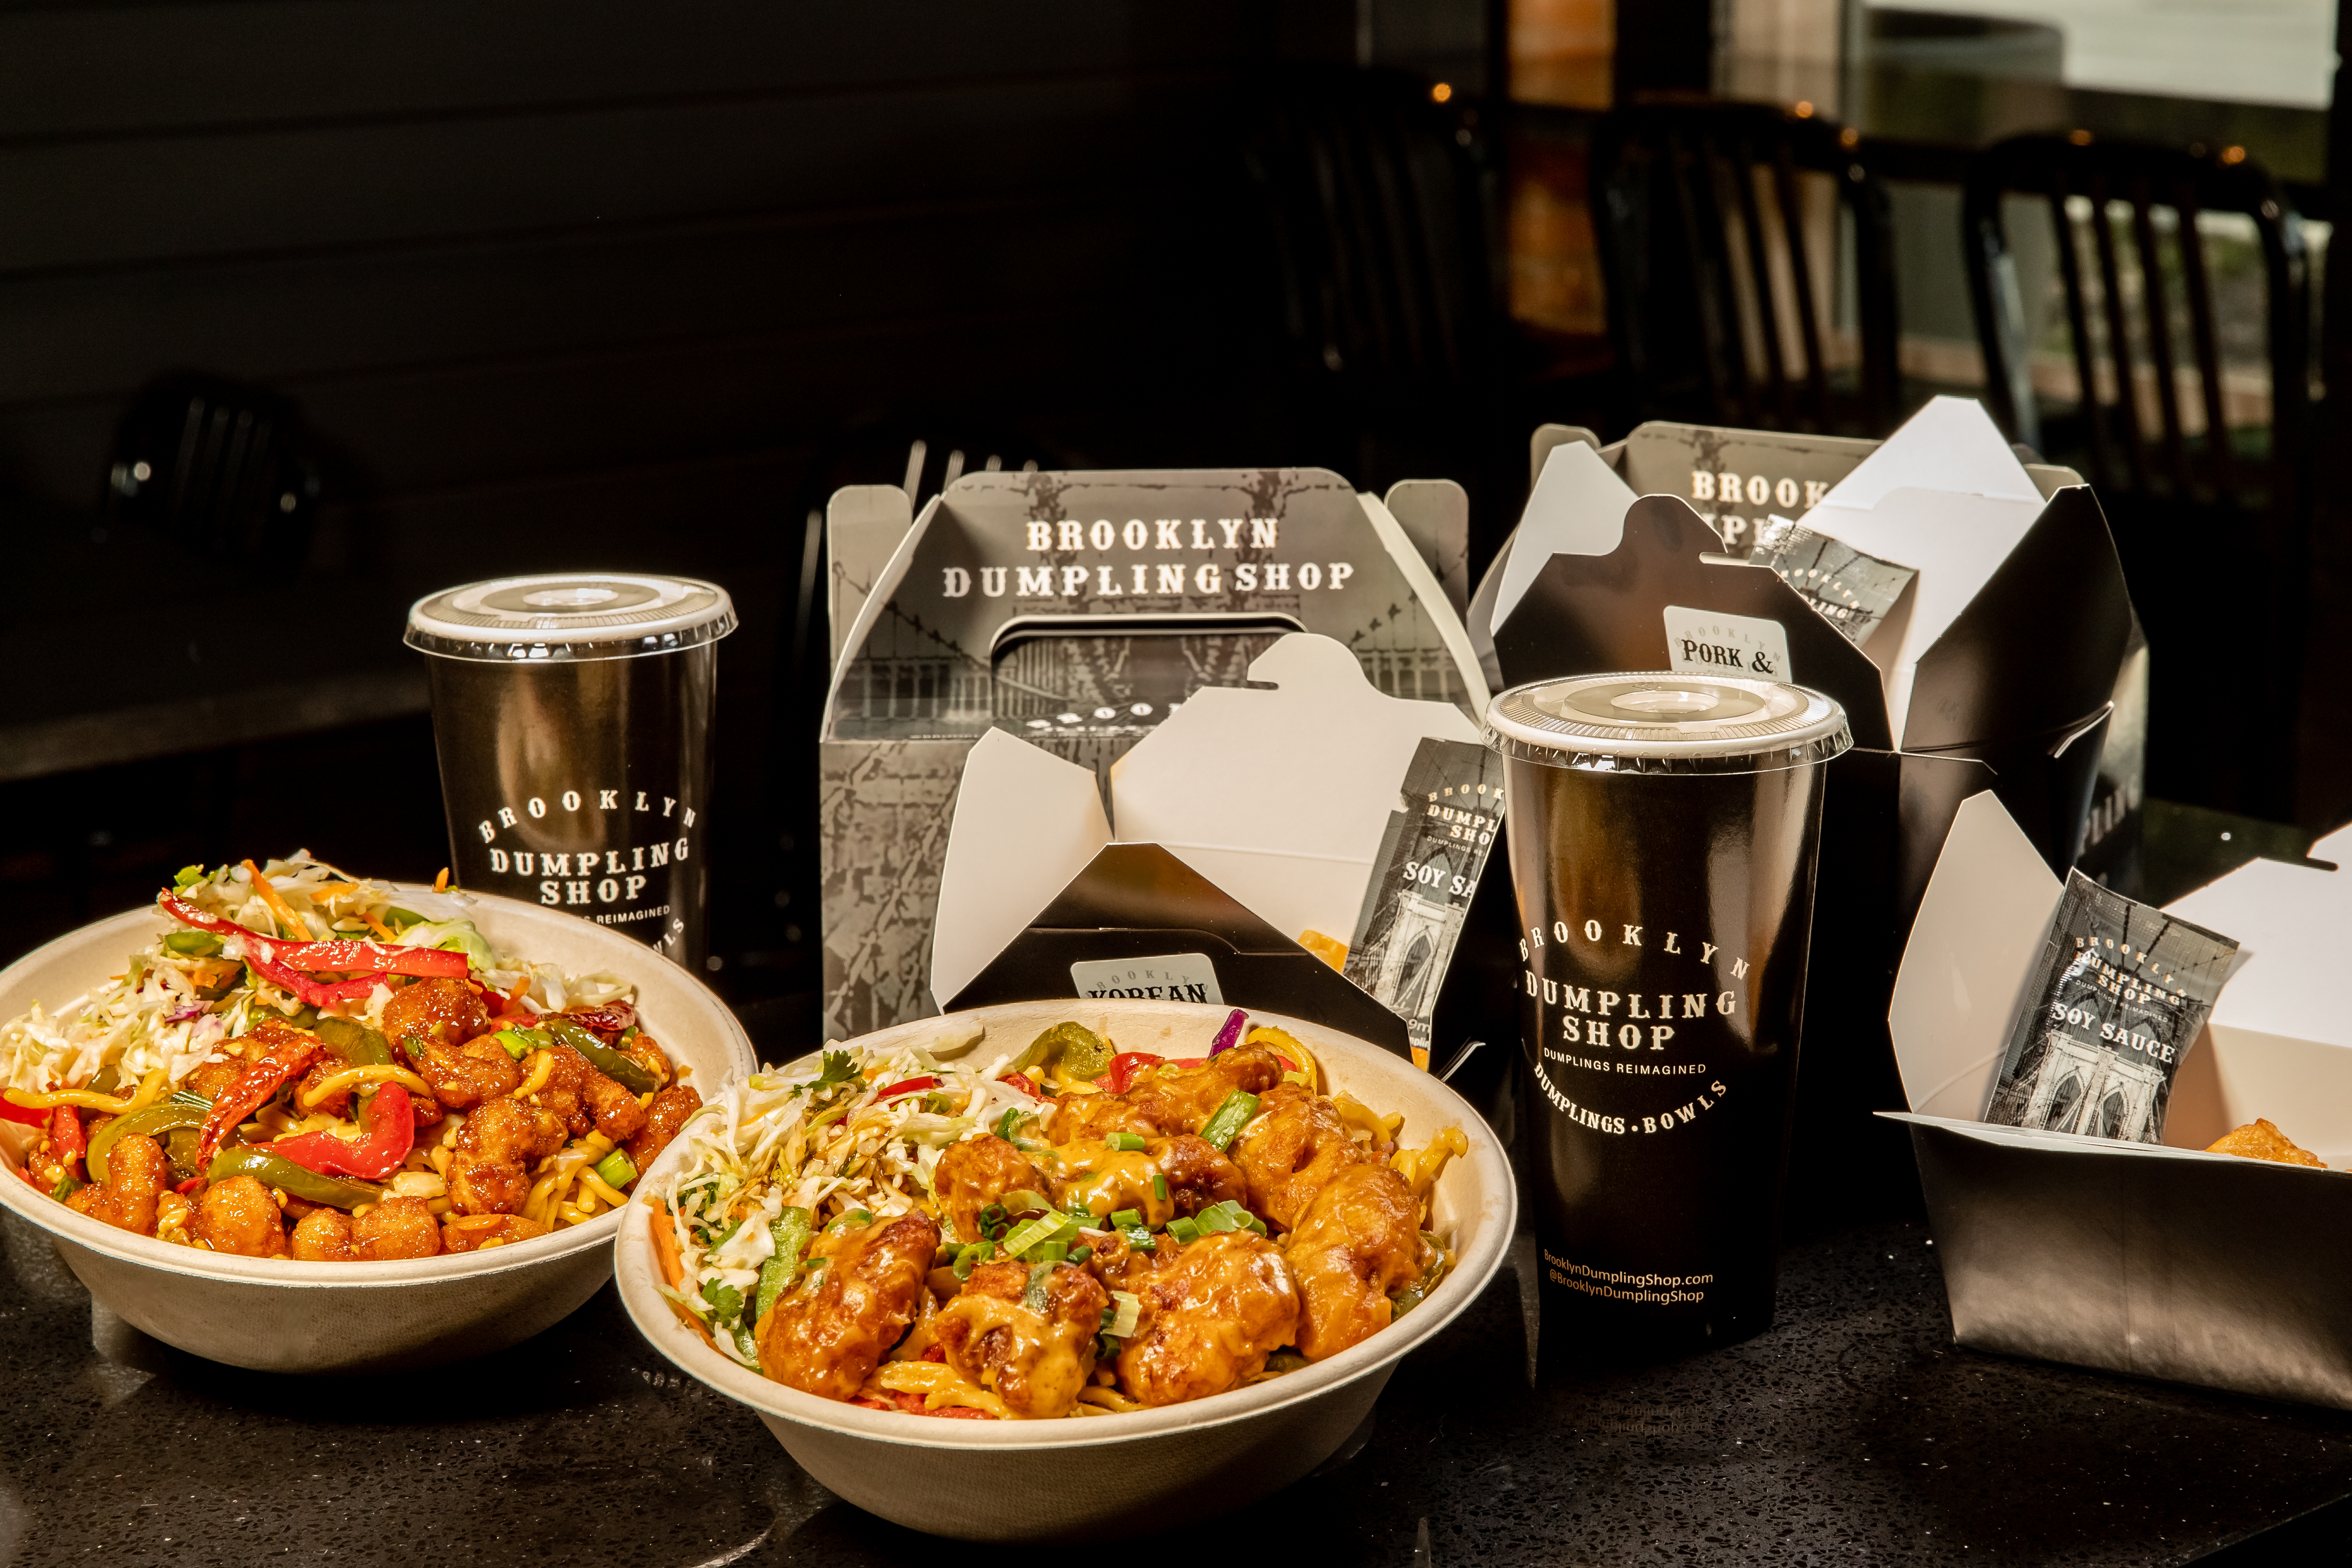 On a black background, bowls with assorted dumplings sit in front of black boxes embossed with a white logo reading “Brooklyn Dumpling Shop.”